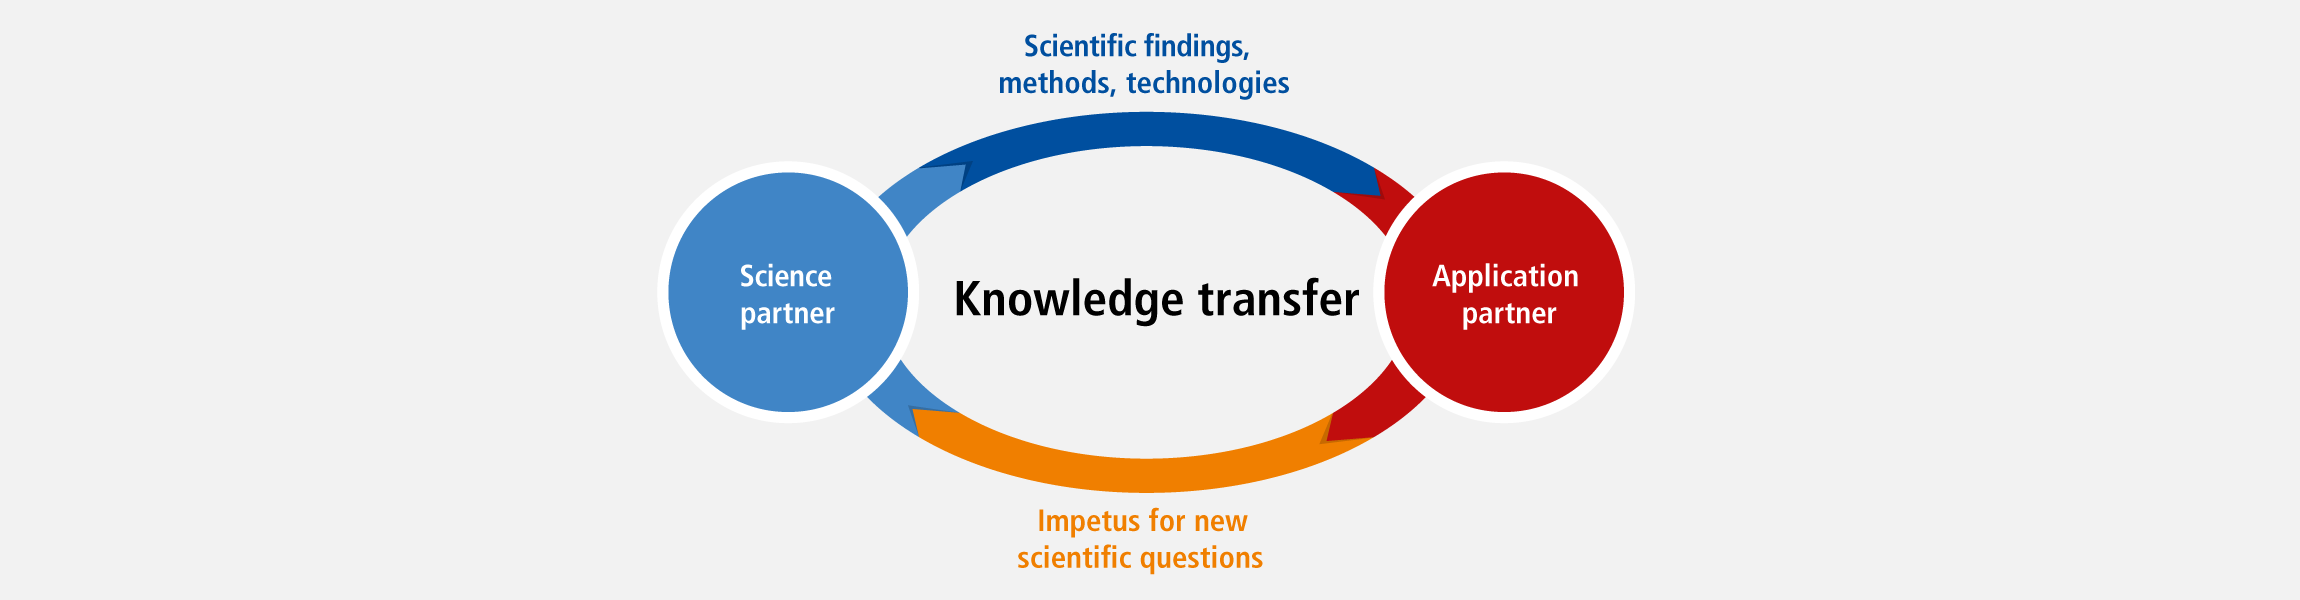 Graphic of Knowledge transfer - Science partner and Application partner